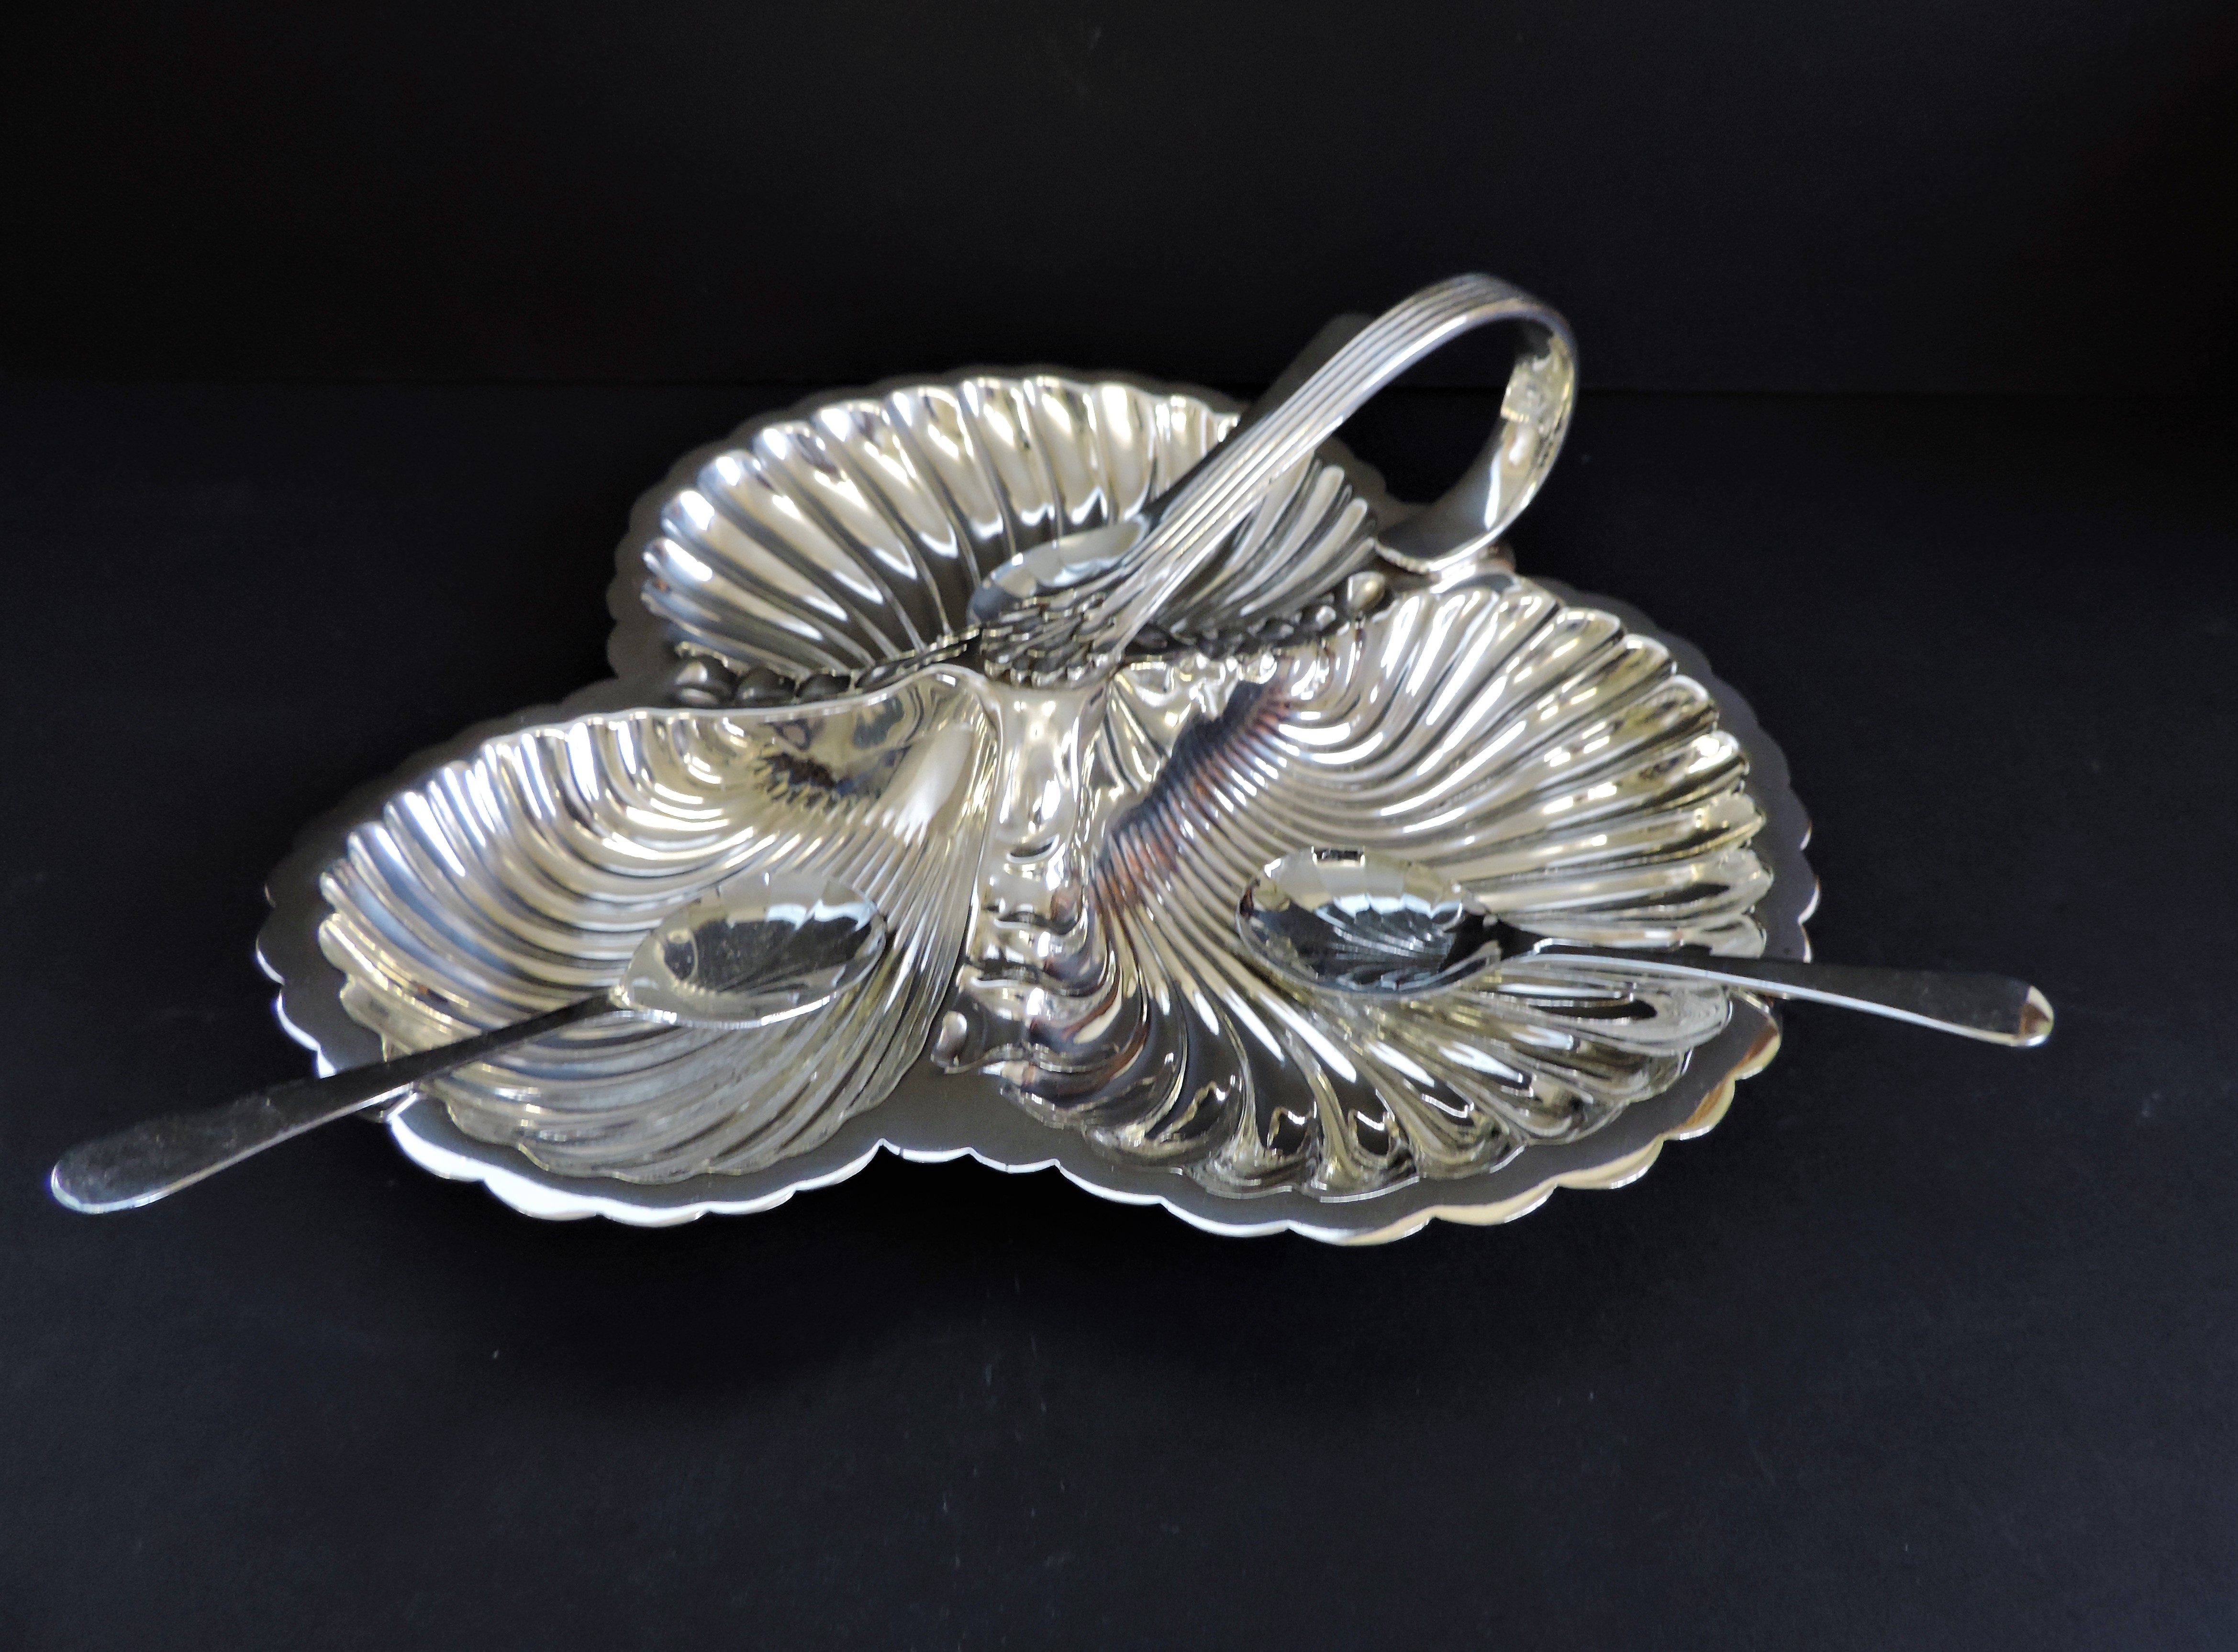 Antique Art Nouveau Silver Plated Hors D'oeuvre/Condiments Tray - Image 5 of 6